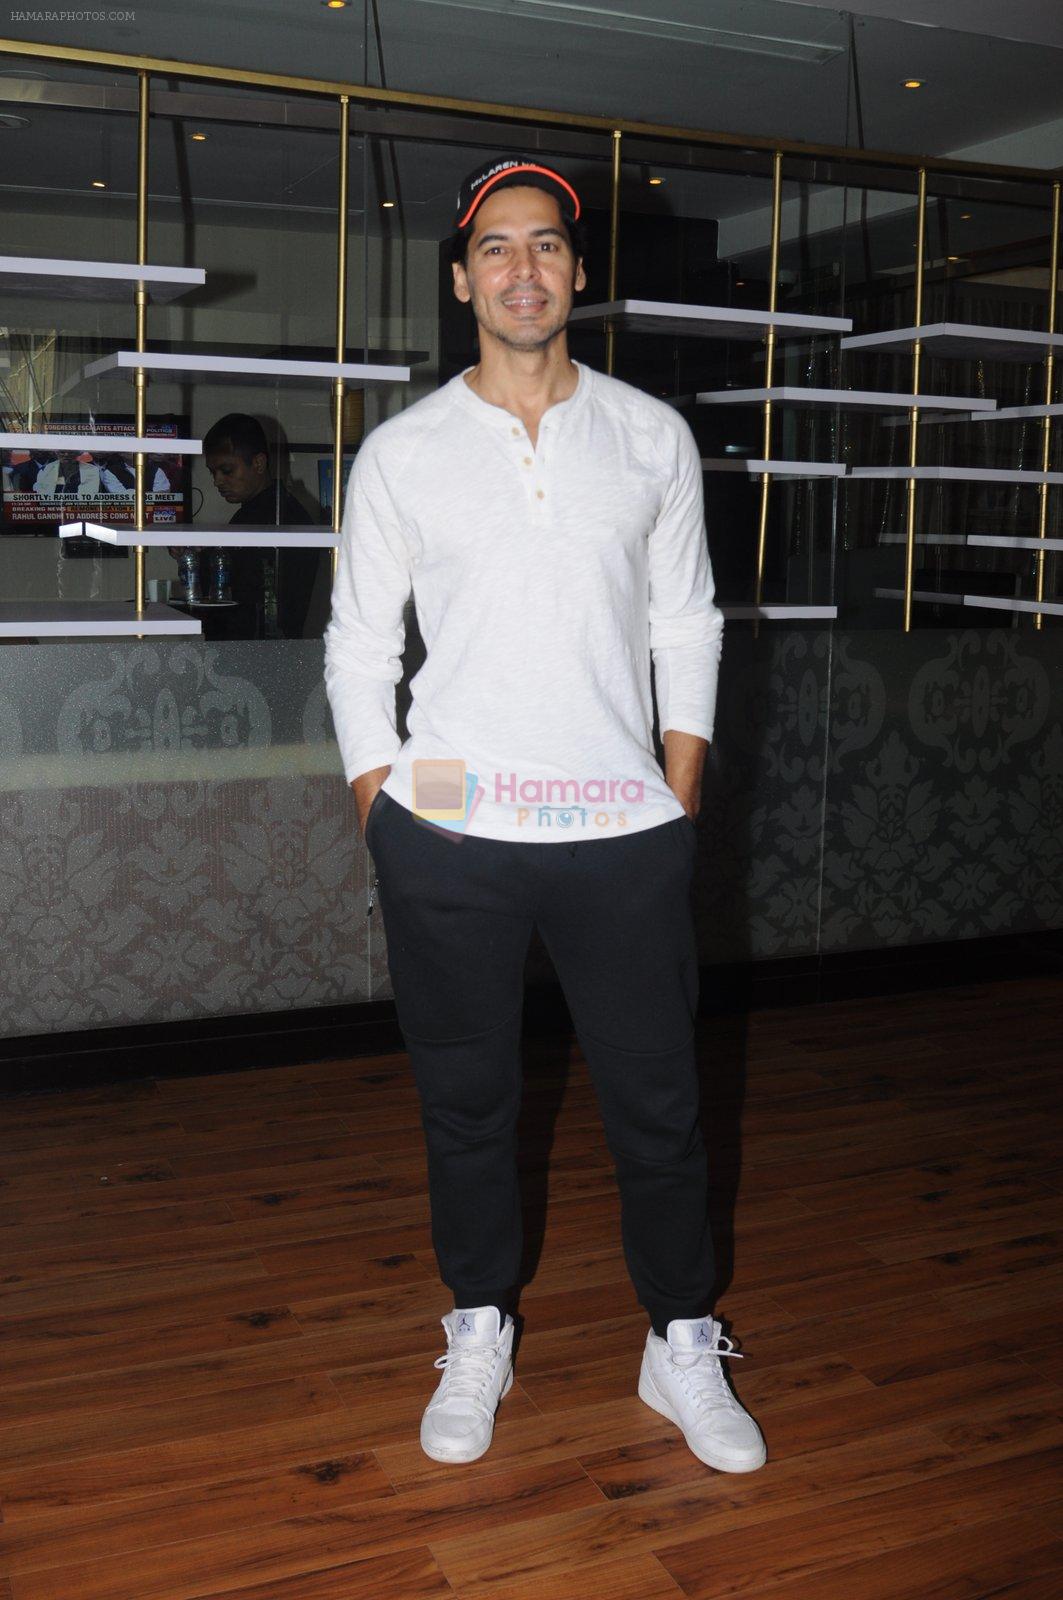 Dino Morea at Road safety event on 11th Jan 2017